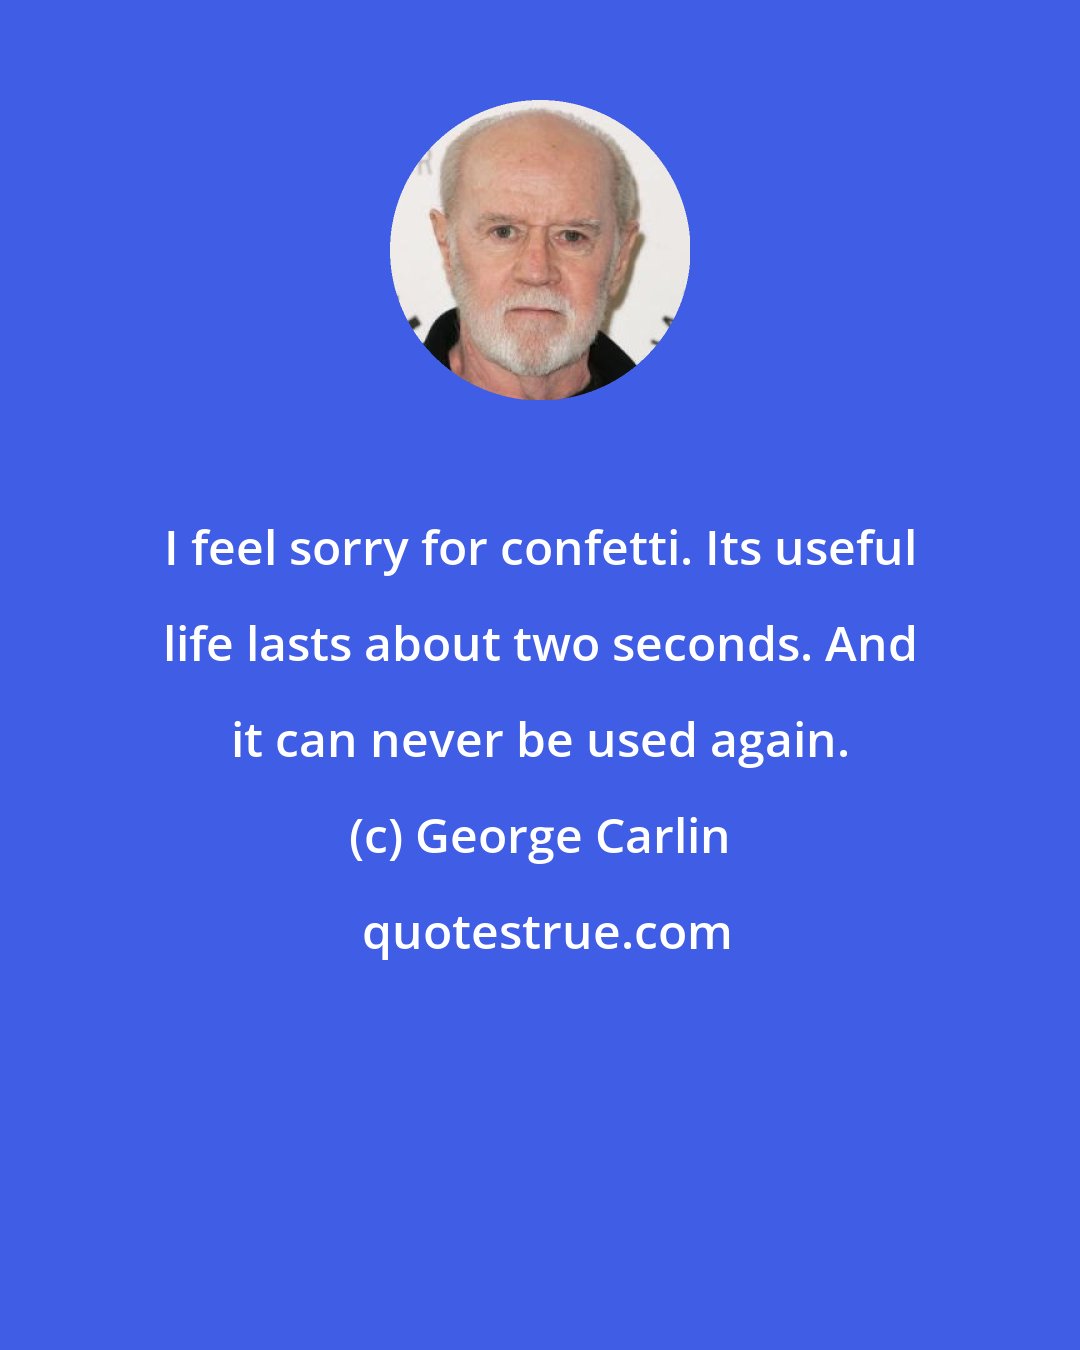 George Carlin: I feel sorry for confetti. Its useful life lasts about two seconds. And it can never be used again.